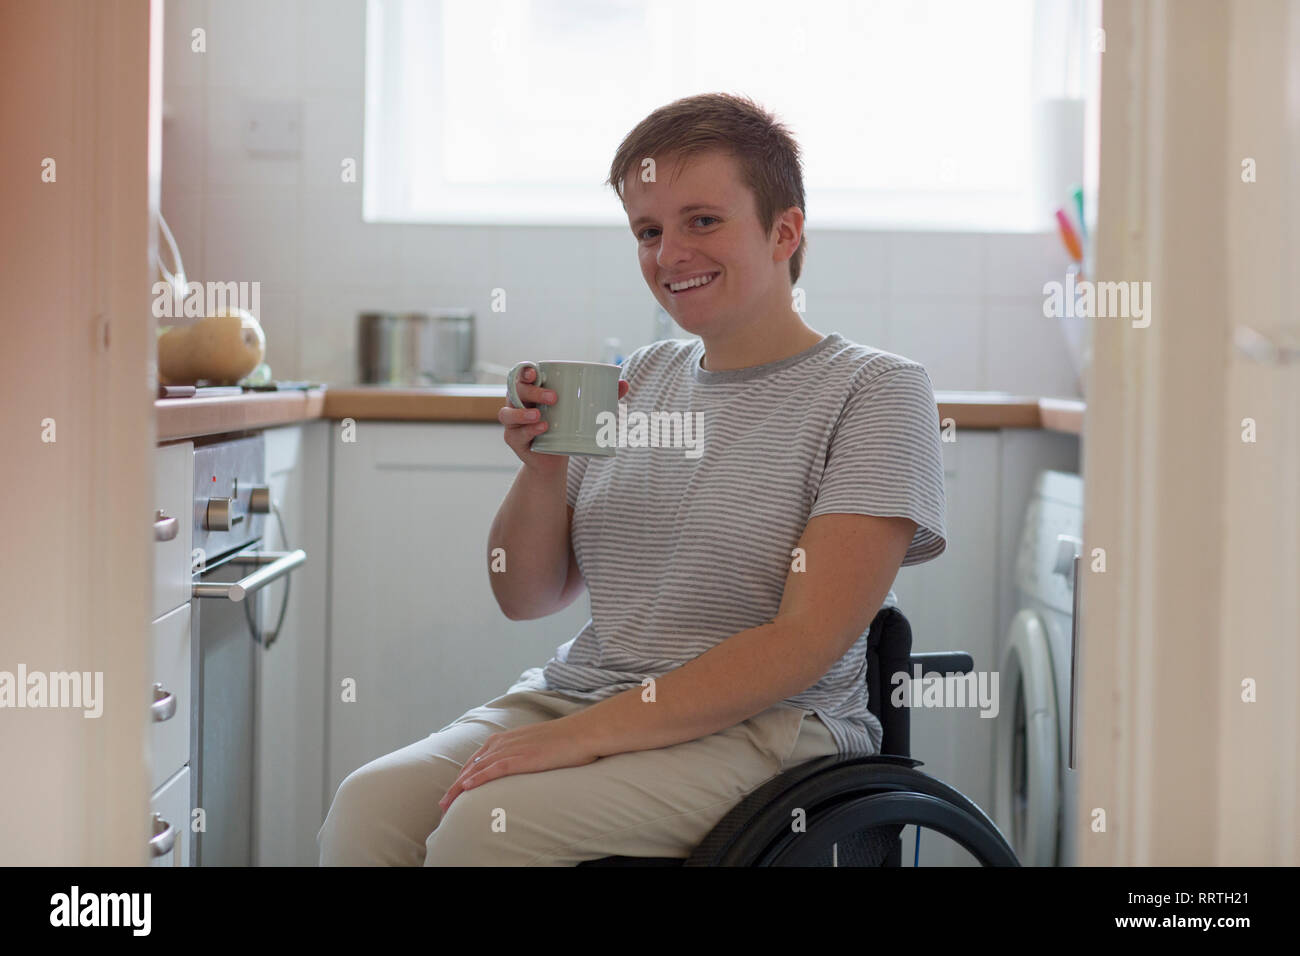 Portrait smiling, confident young woman in wheelchair drinking tea in apartment kitchen Stock Photo